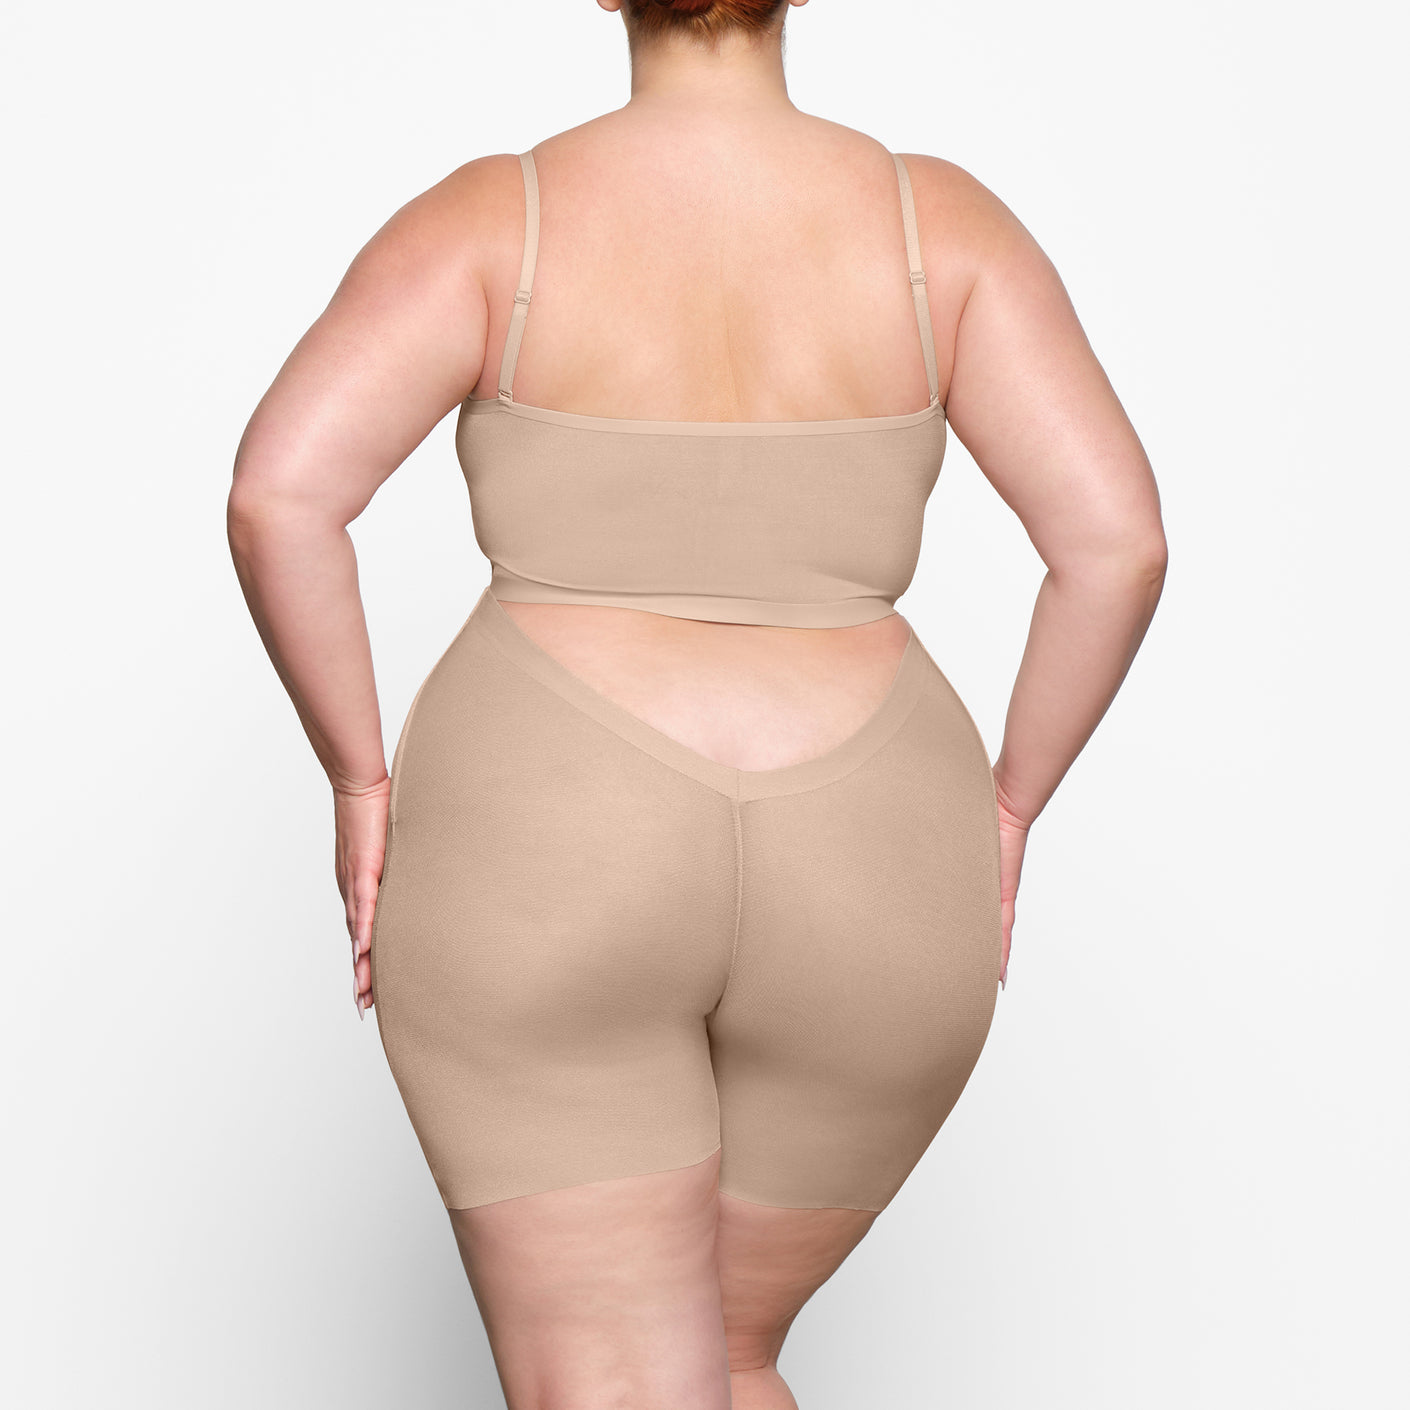 Skims Shapewear Review - Must Read This Before Buying